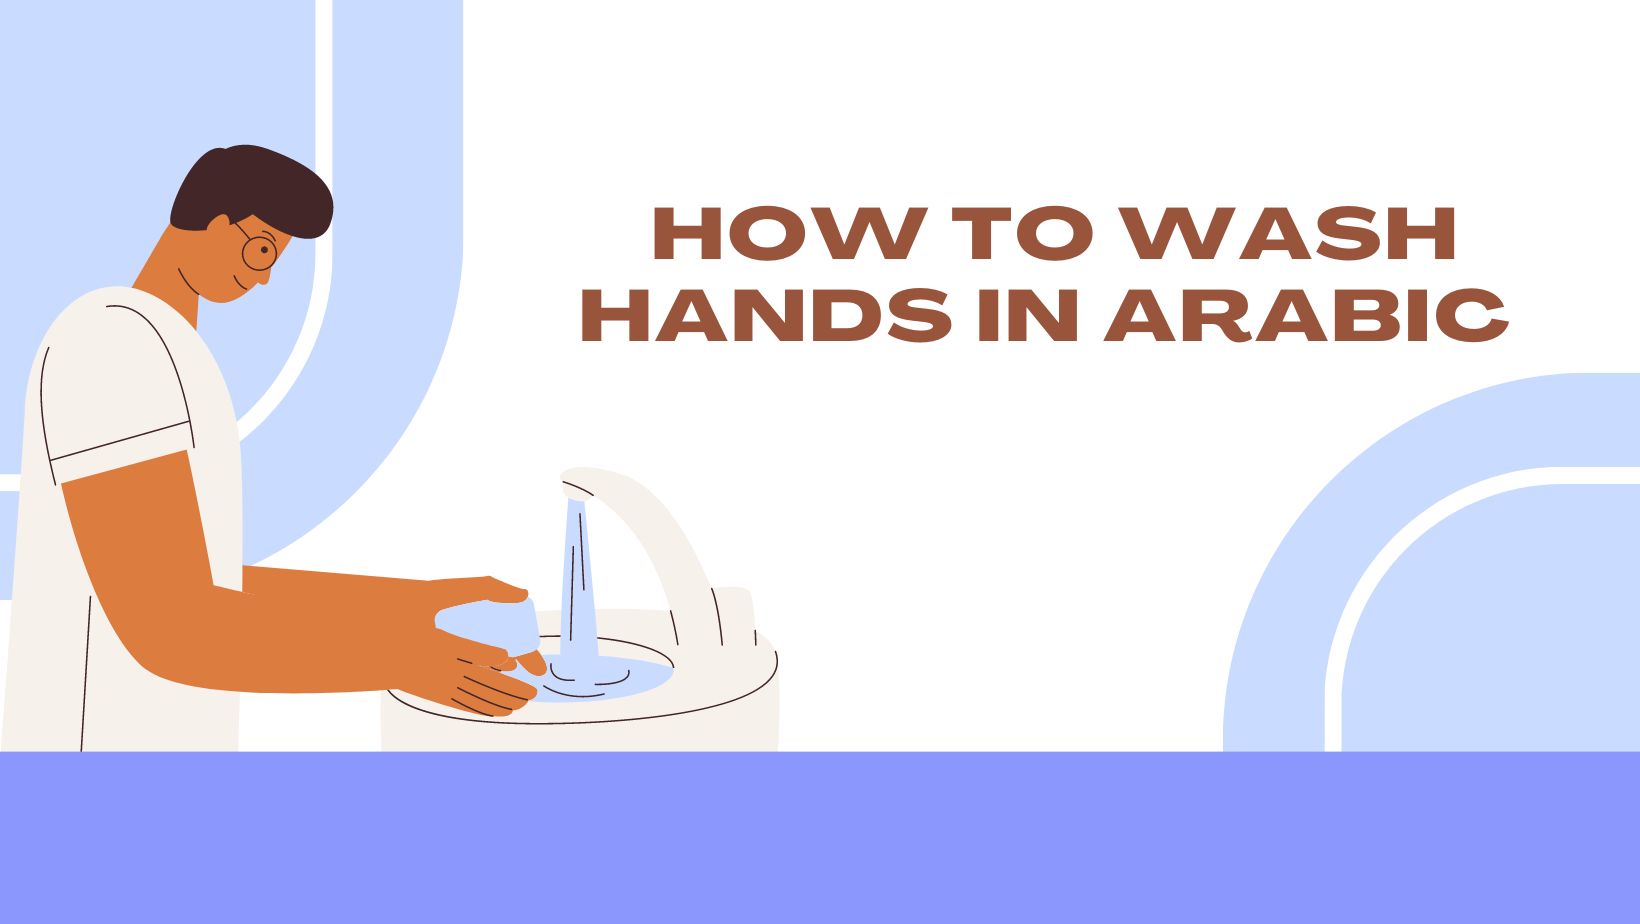 How to wash hands in Arabic